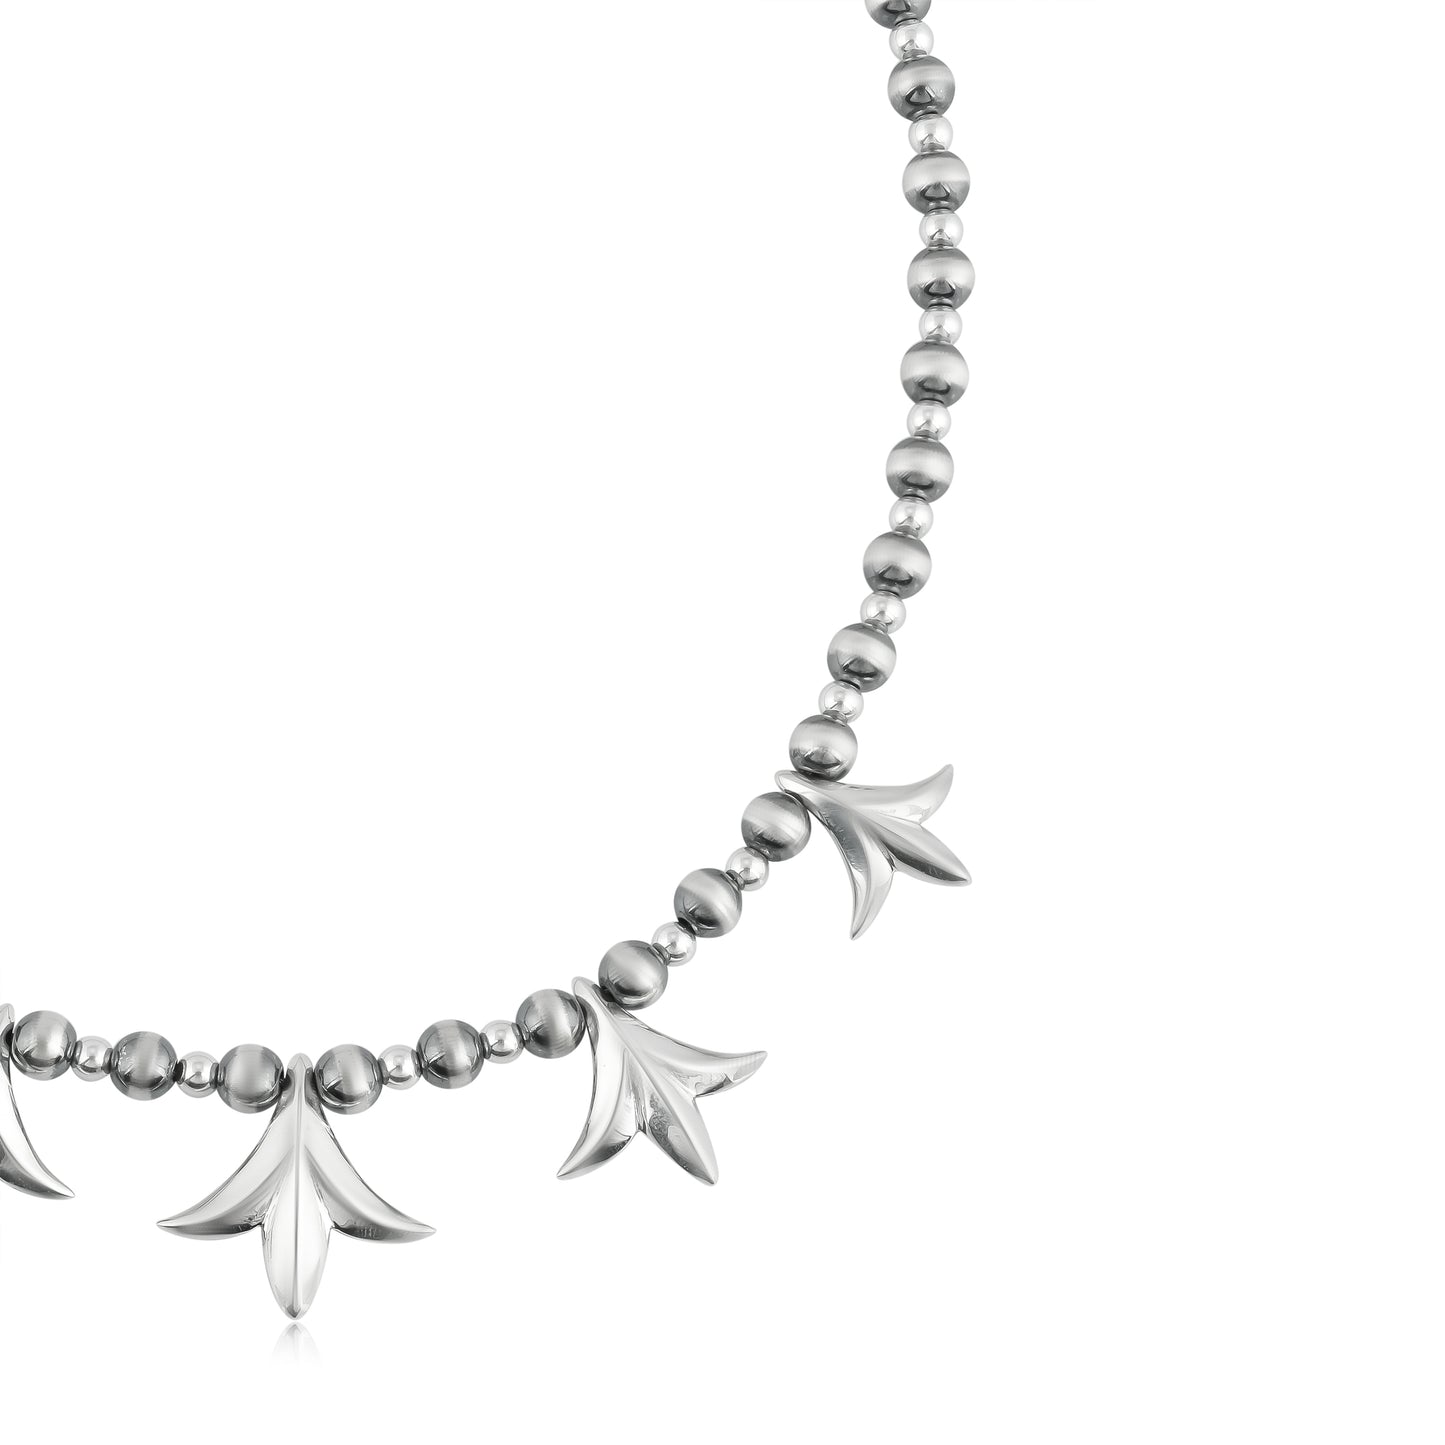 Sterling Silver Peak Squash Blossom Beaded Necklace 17 to 21 inch